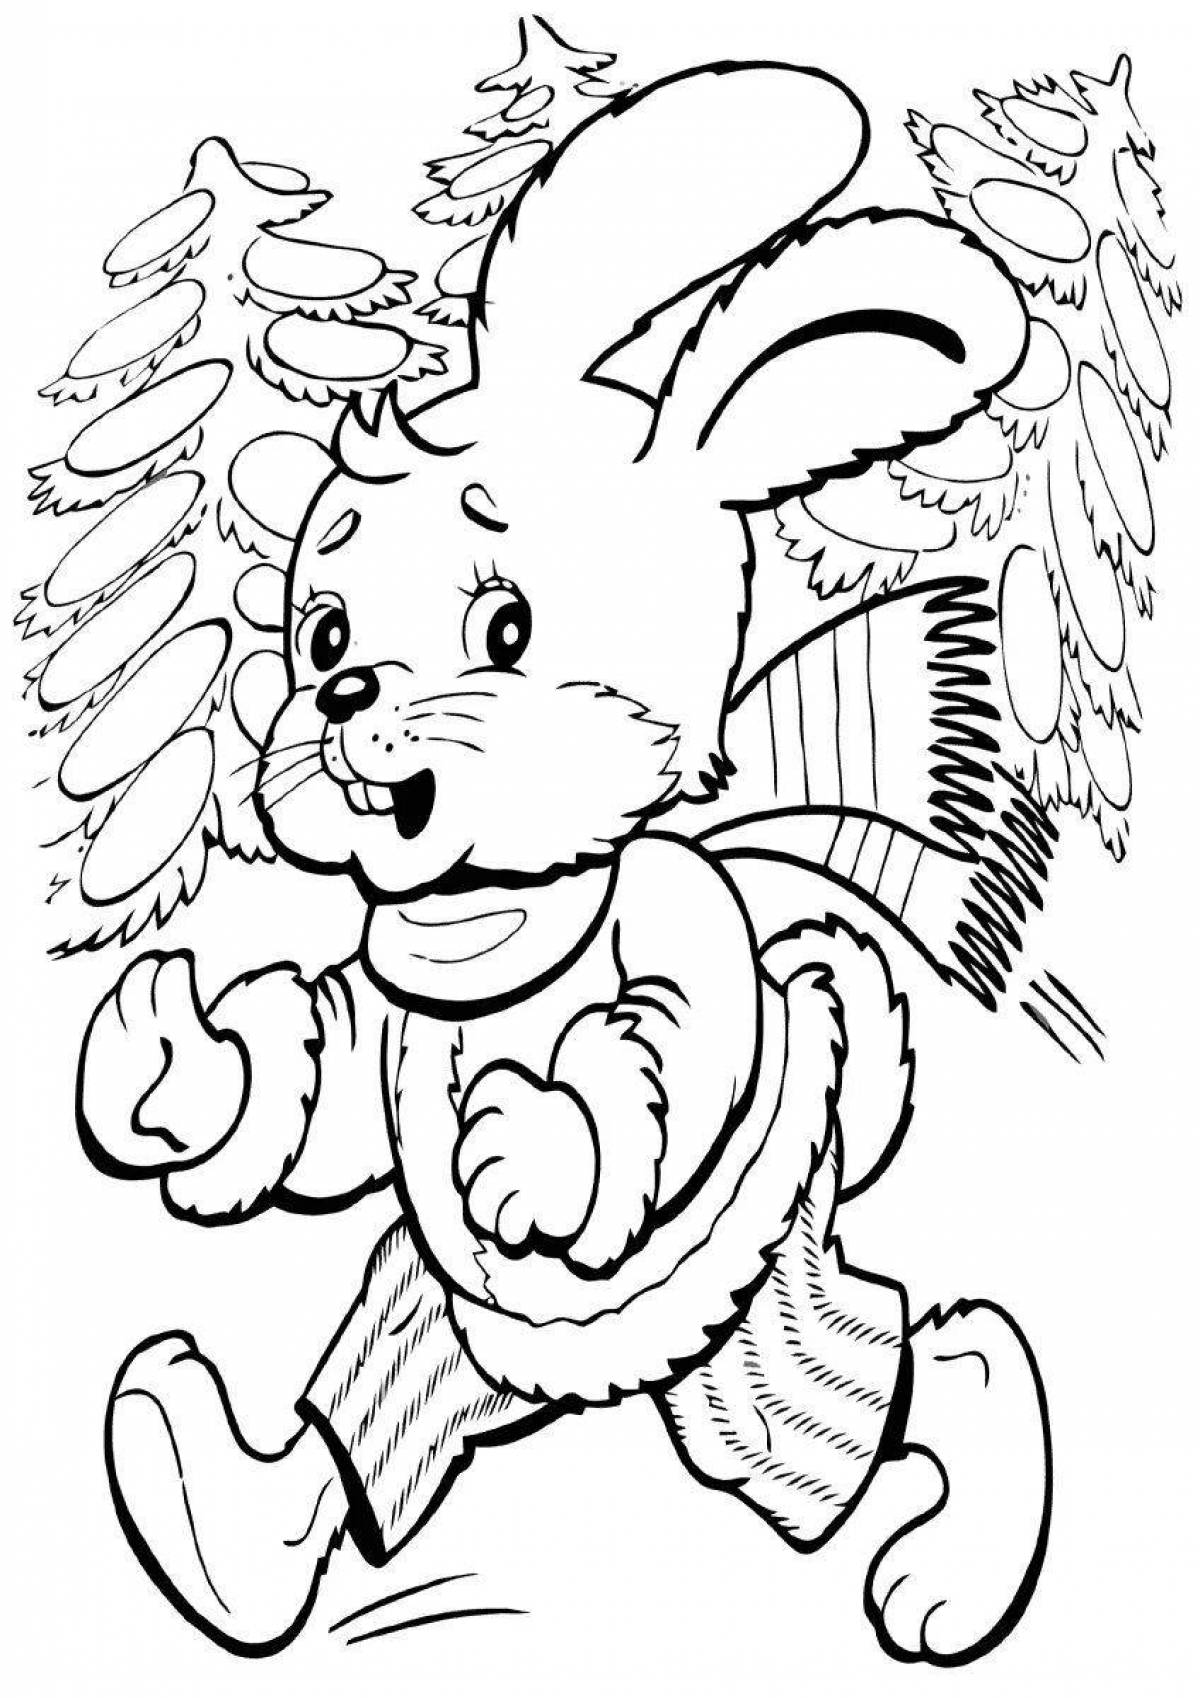 Dynamic Bouncer Coloring Page